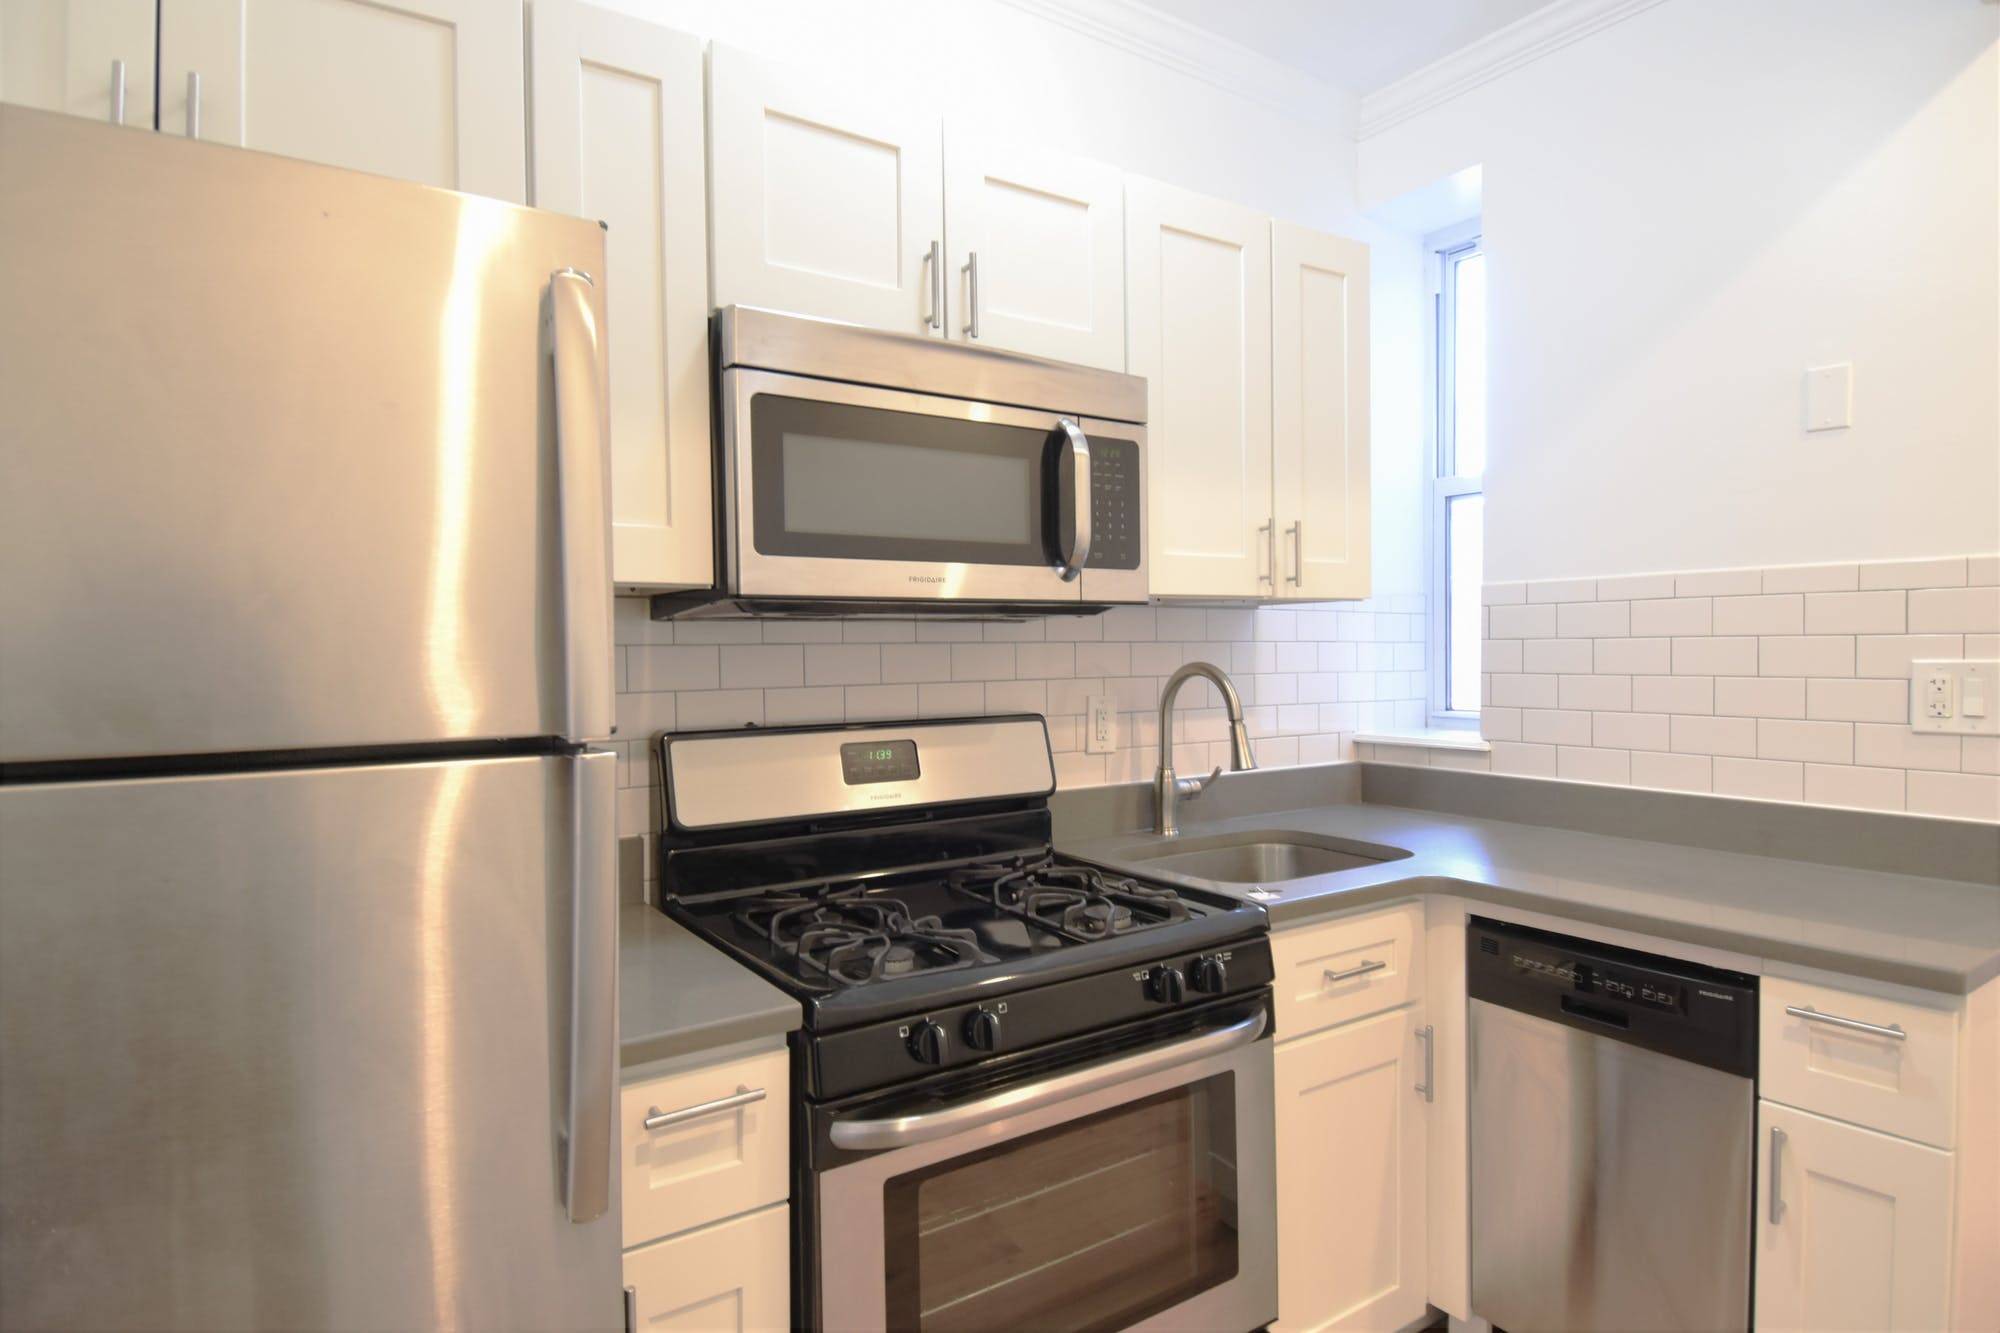 Welcome to 103 3rd Place in Carroll Gardens !